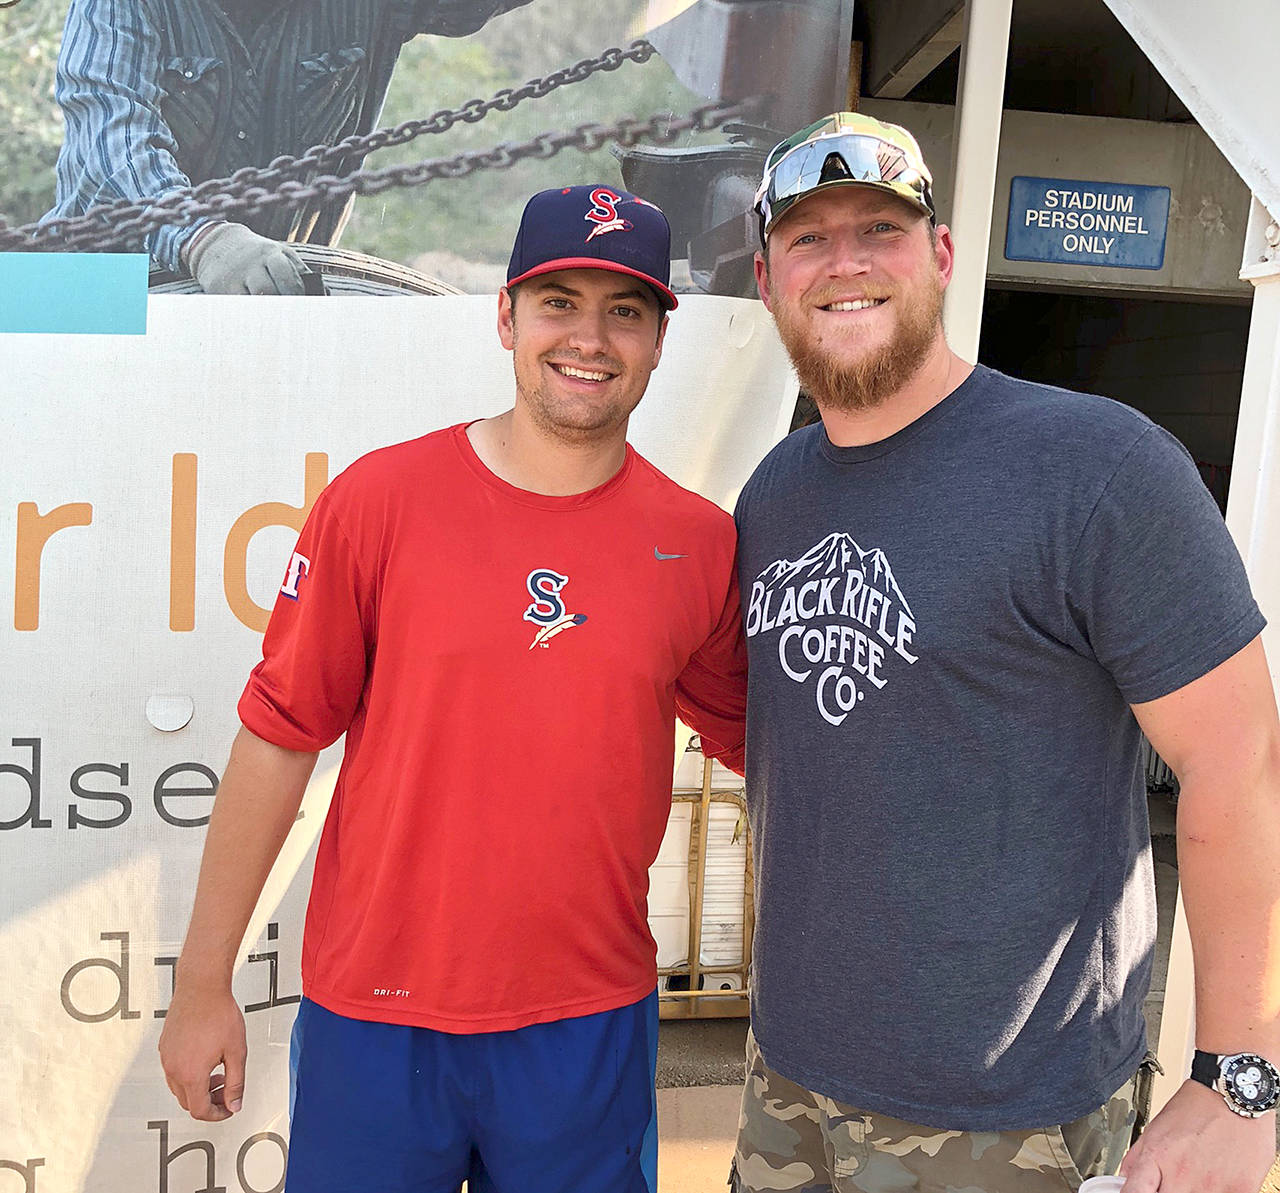 Cole Uvila, left, and Easton Napiontek, members of the Port Angeles High School Class of 2012, held a mini-reunion before Uvila and his Spokane Indians faced the Boise Hawks. The friends and former Roughriders teammates were each drafted by the Texas Rangers, Uvila last June and Napiontek in 2013. Uvila has a 1-0 record with a 1.61 ERA and two saves in 13 appearances for Class-A Spokane this summer.